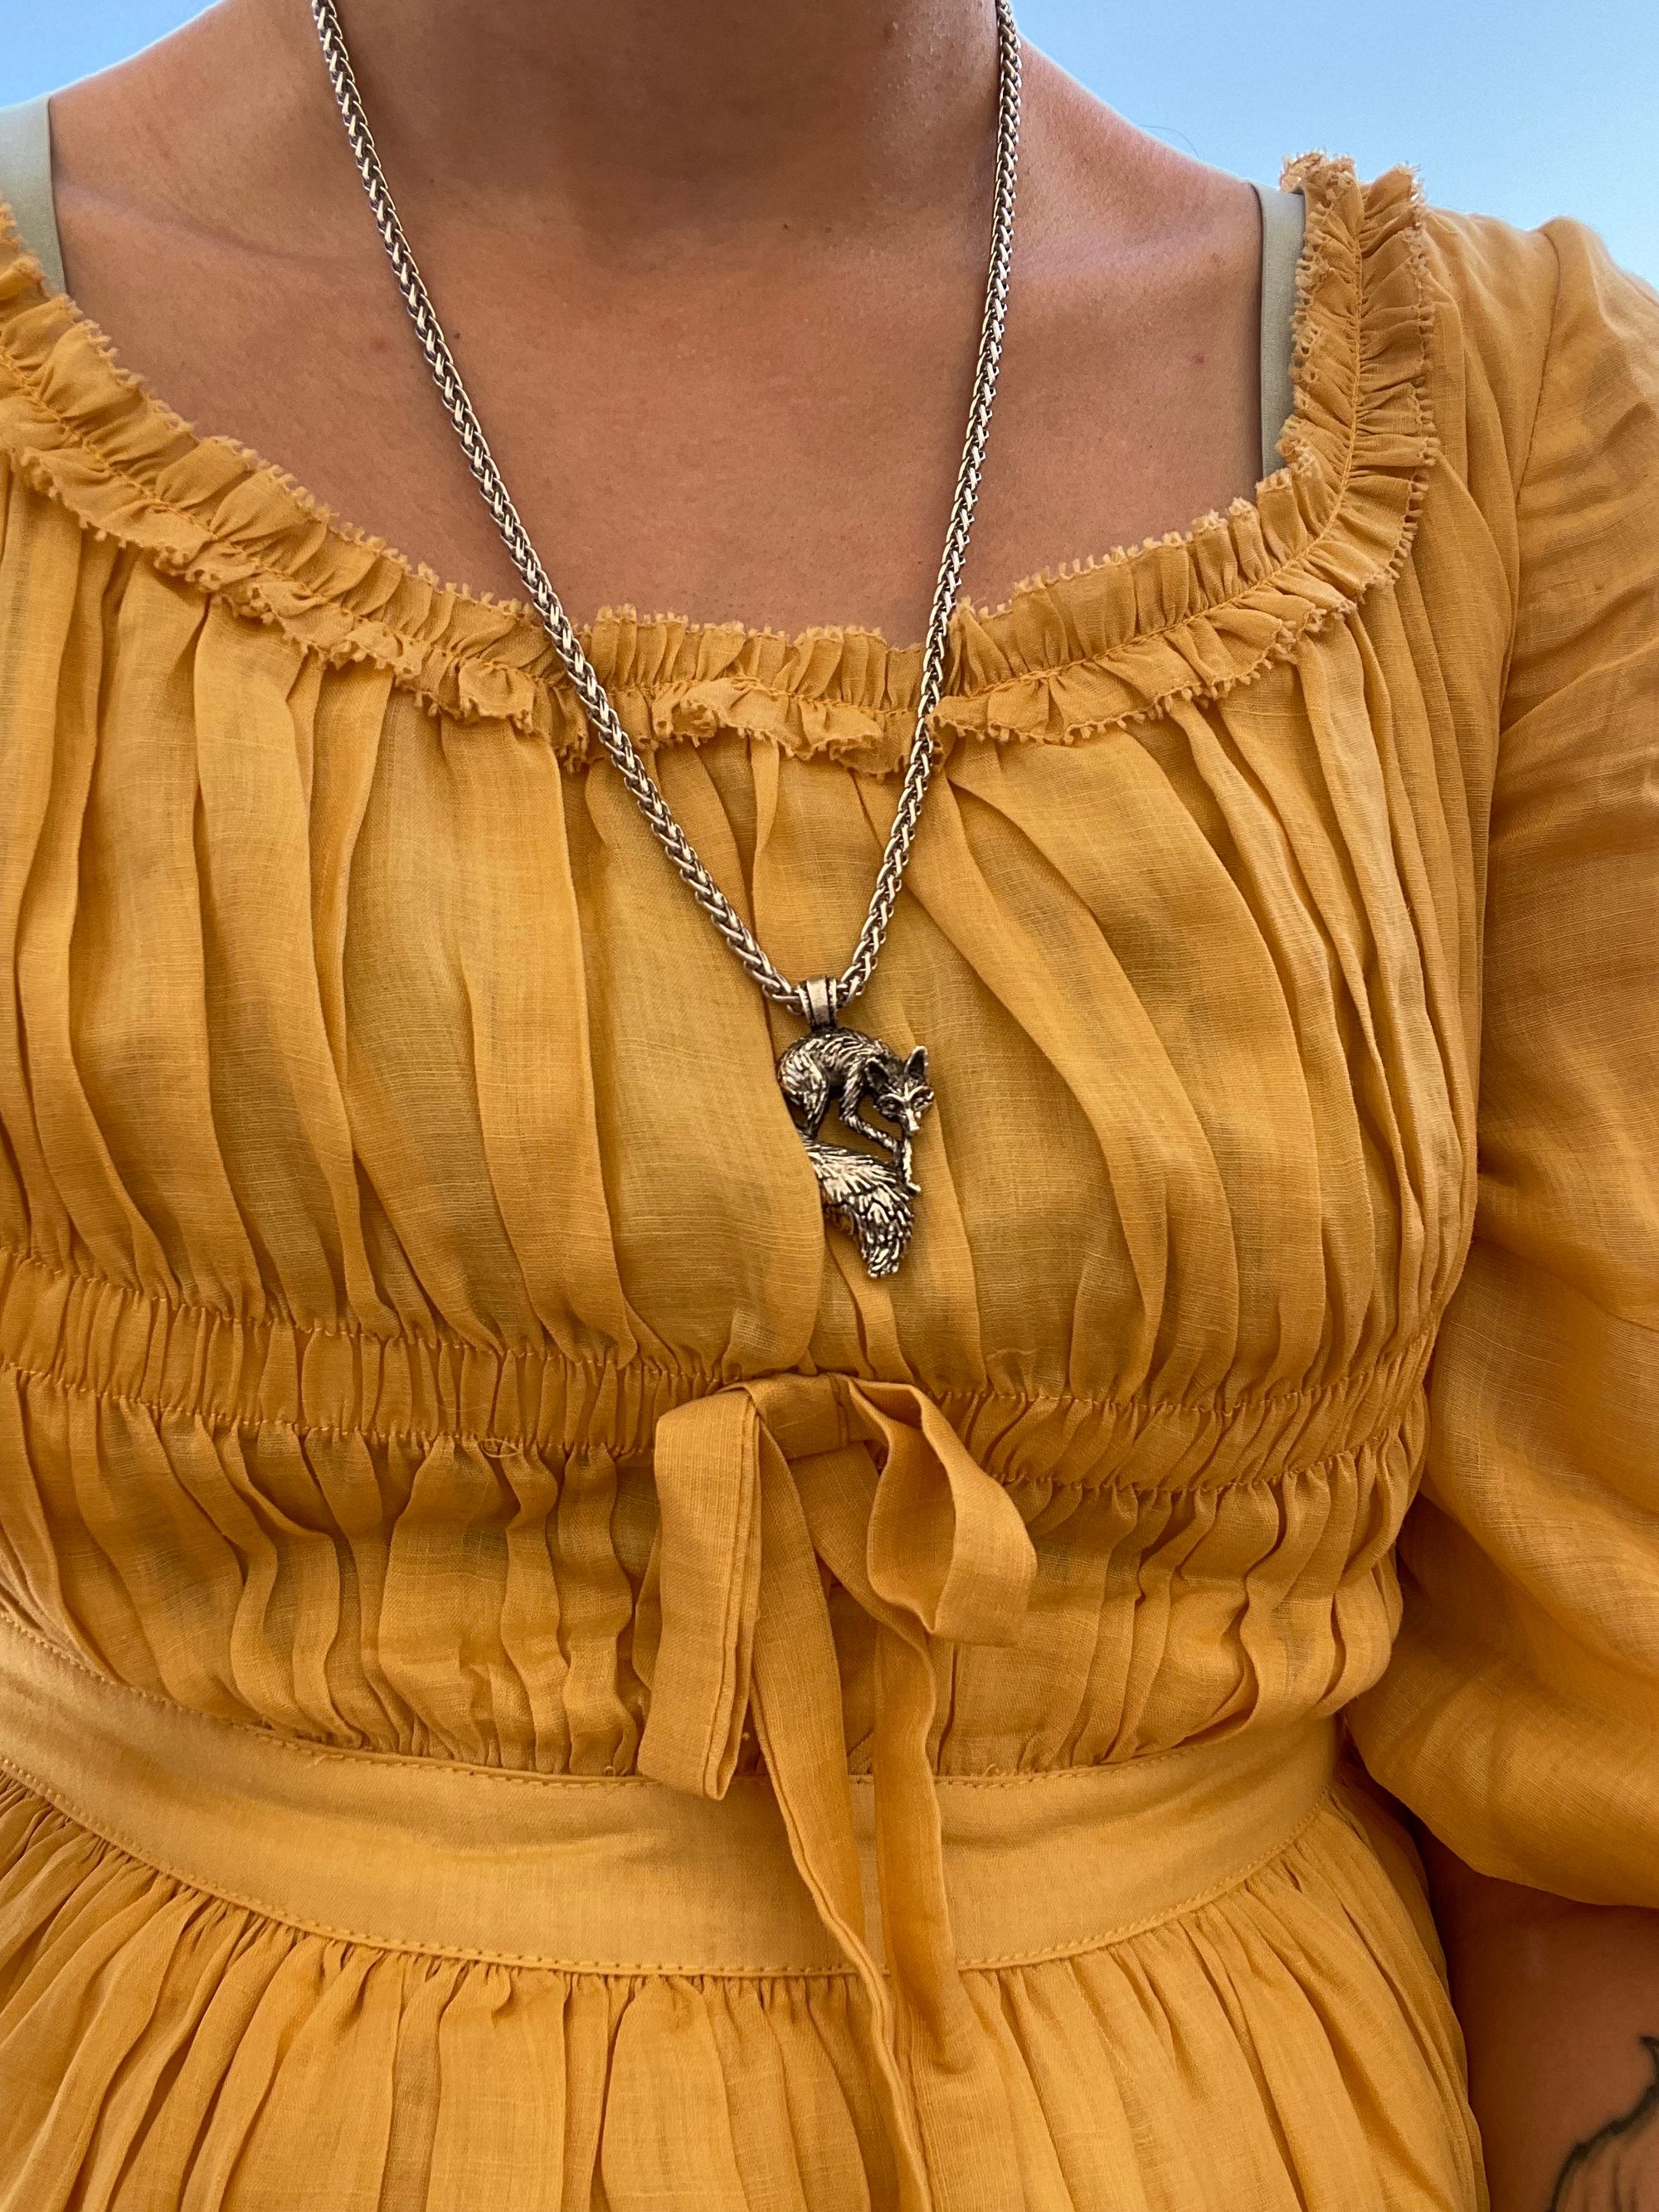 Closeup of a silver fox necklace being worn by a woman with a yellow dress.